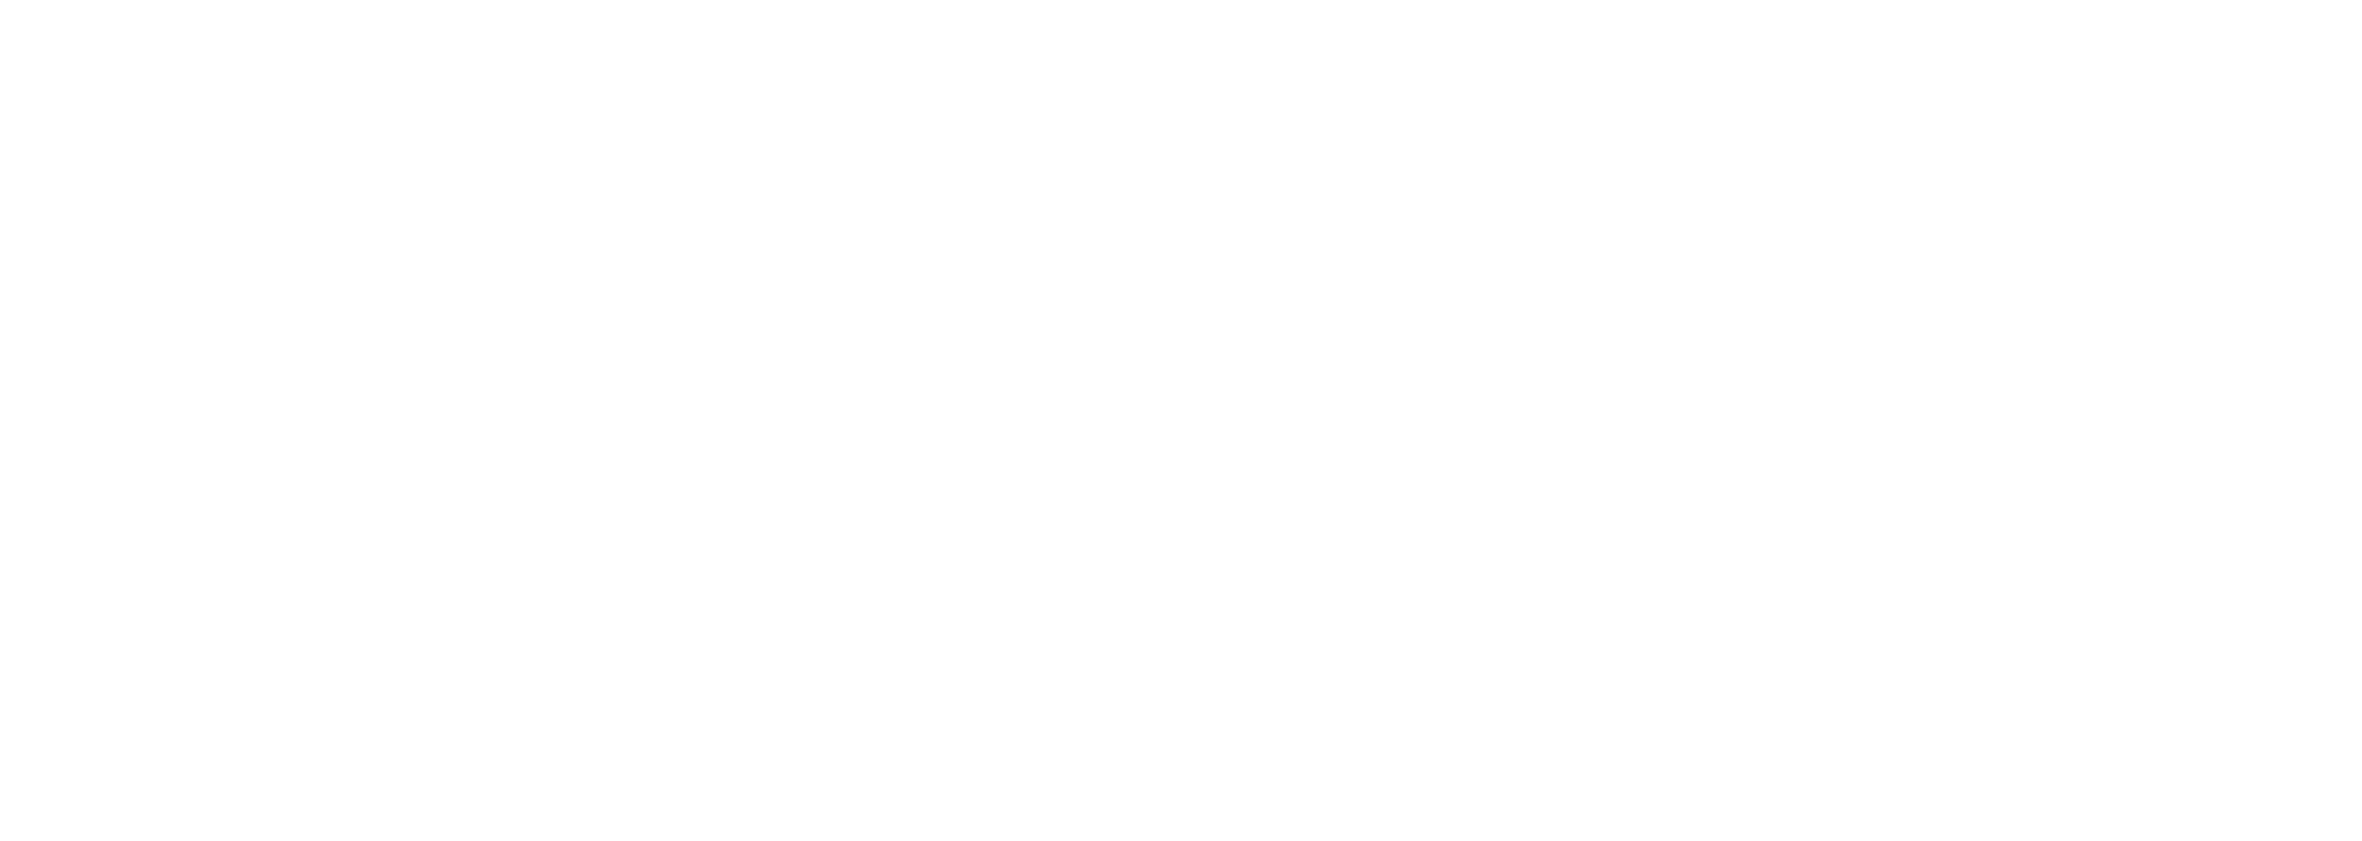 Northern Territory Government Image Library